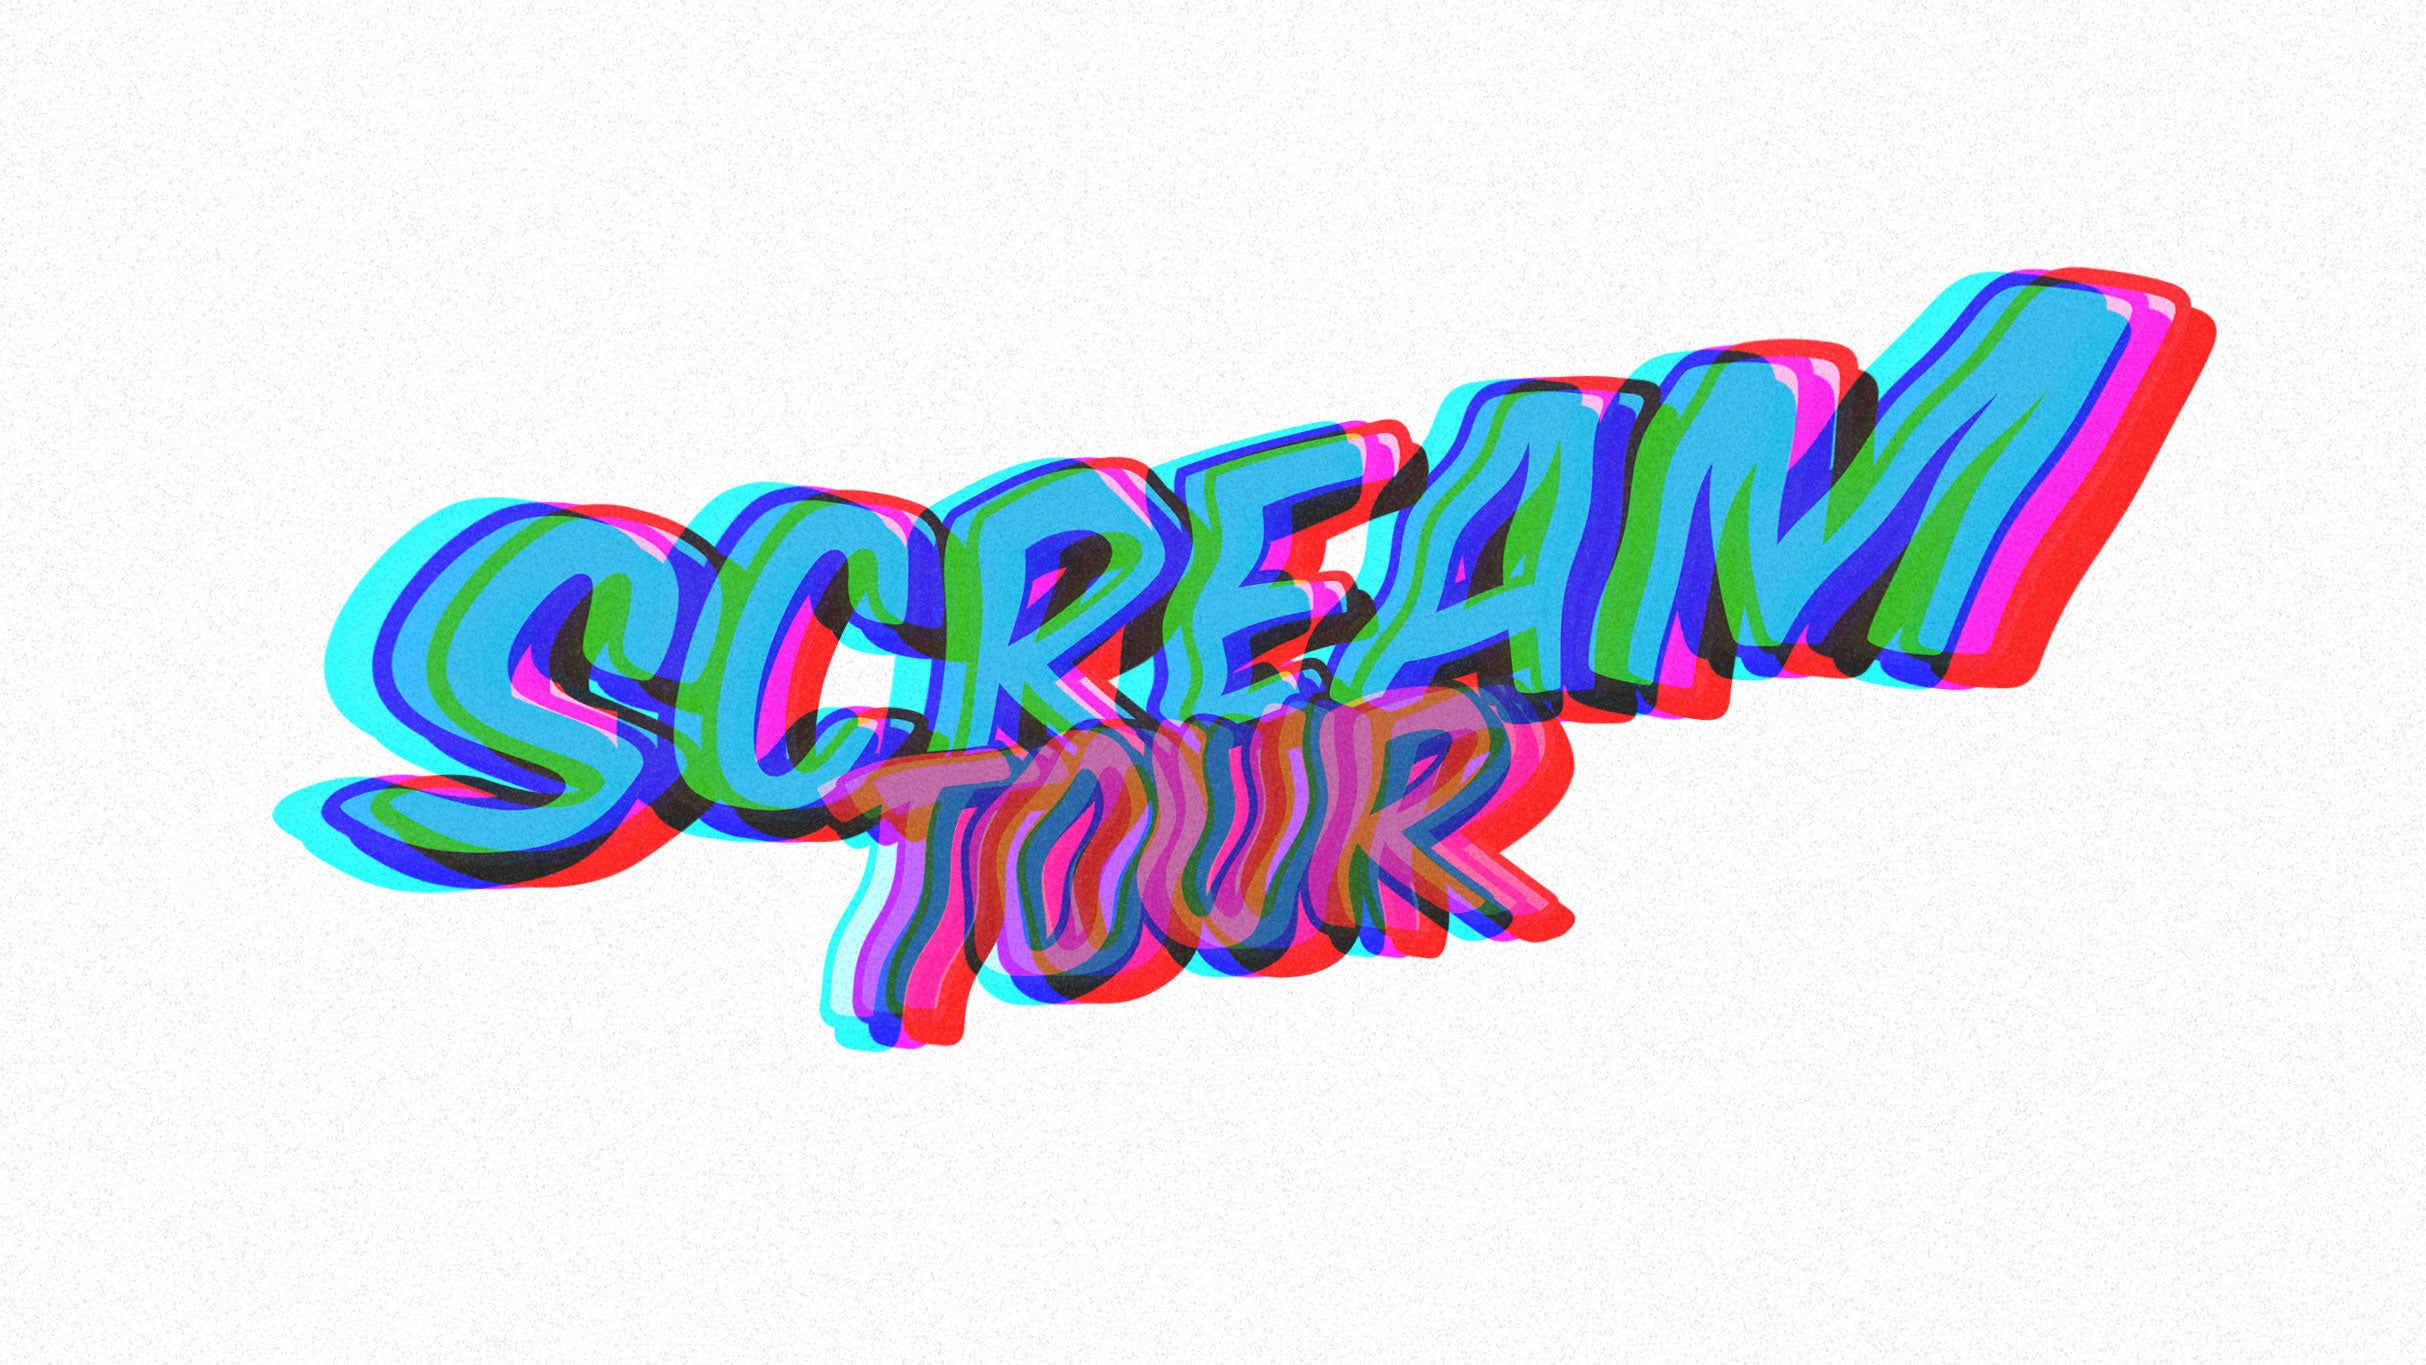 Scream Tour 2023 free presale listing for concert tickets in Tampa, FL (Yuengling Center)